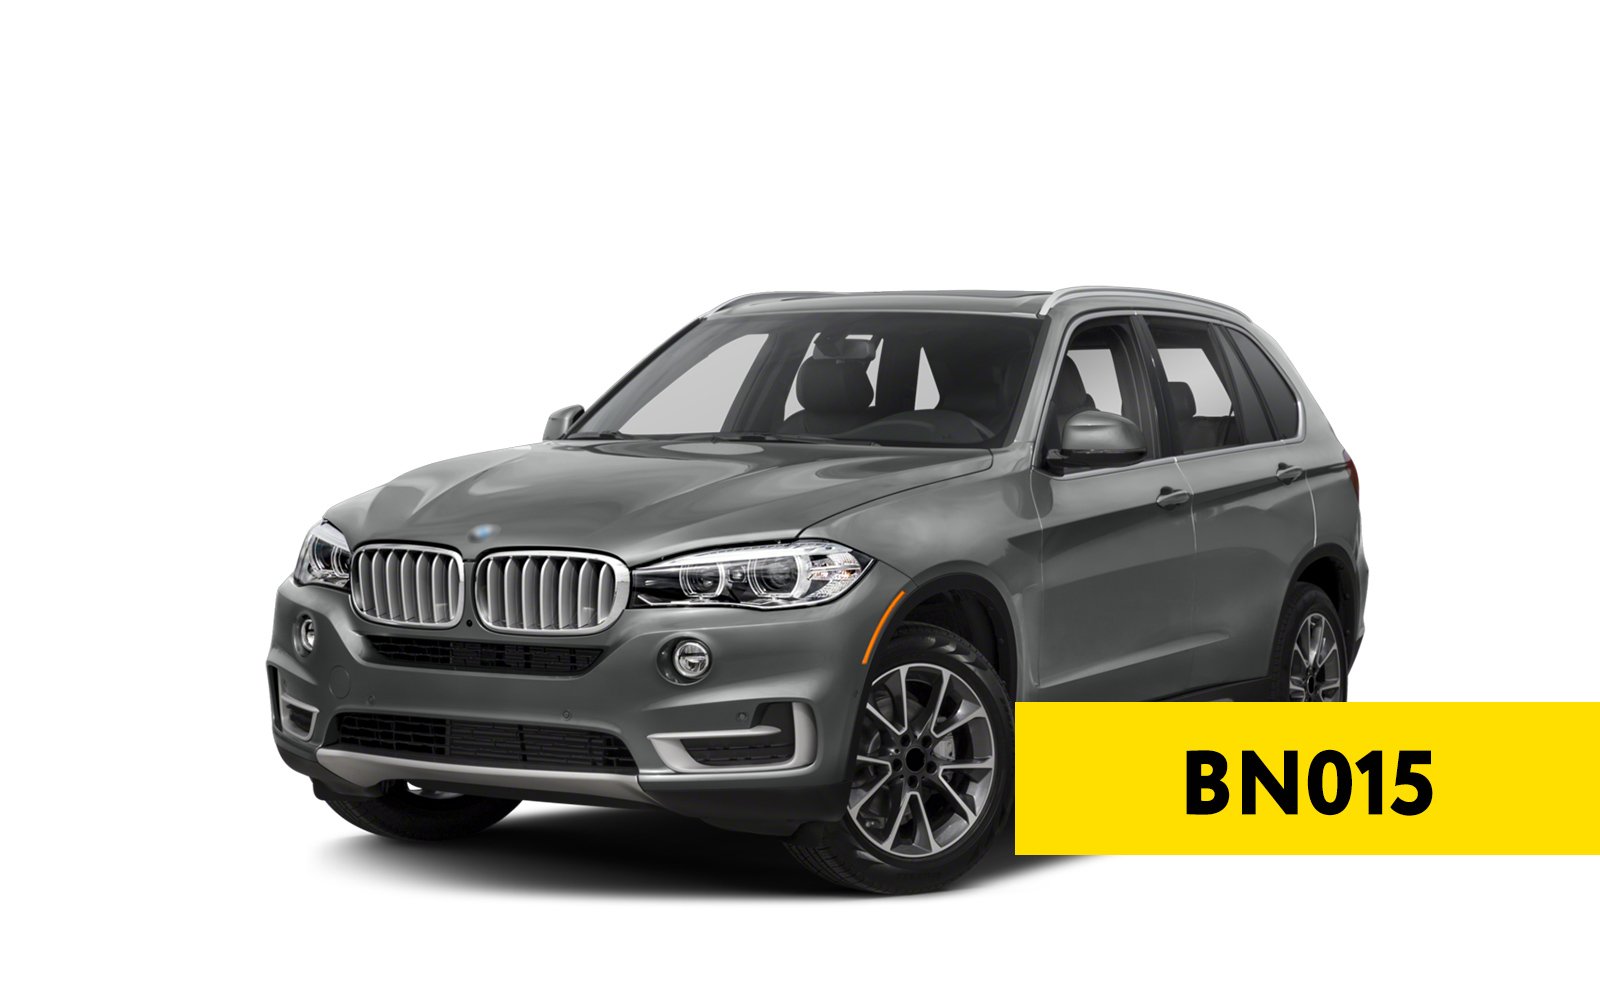 NEW BN015 LICENSE: KEY LEARNING FOR BMW VEHICLES WITH BDC VERSIONS 85 AND HIGHER